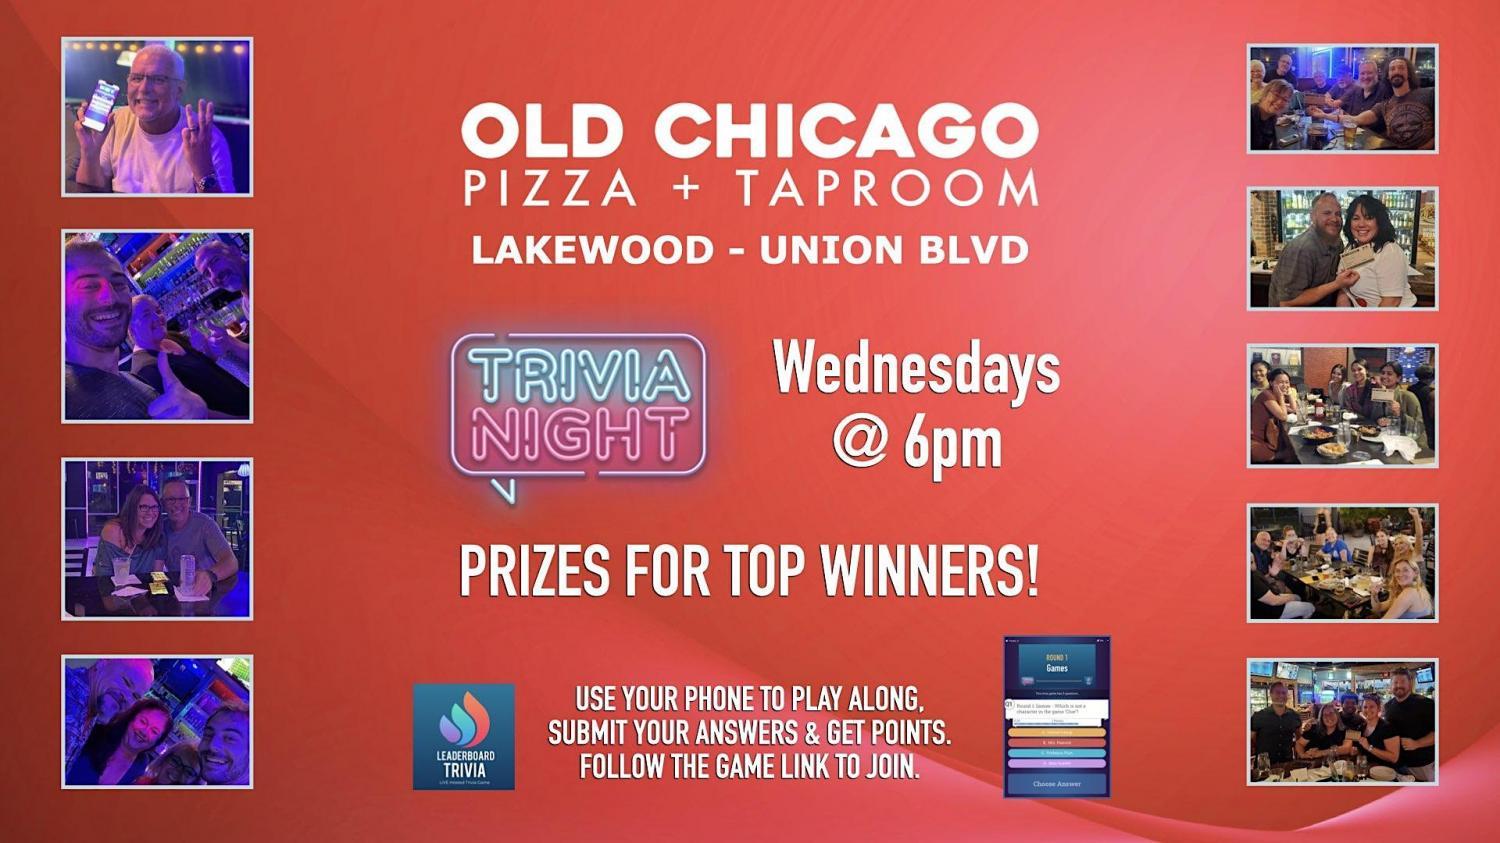 Old Chicago - Union BLVD Lakewood CO | Leaderboard Trivia Game Night
Wed Oct 5, 6:00 PM - Wed Oct 5, 8:00 PM